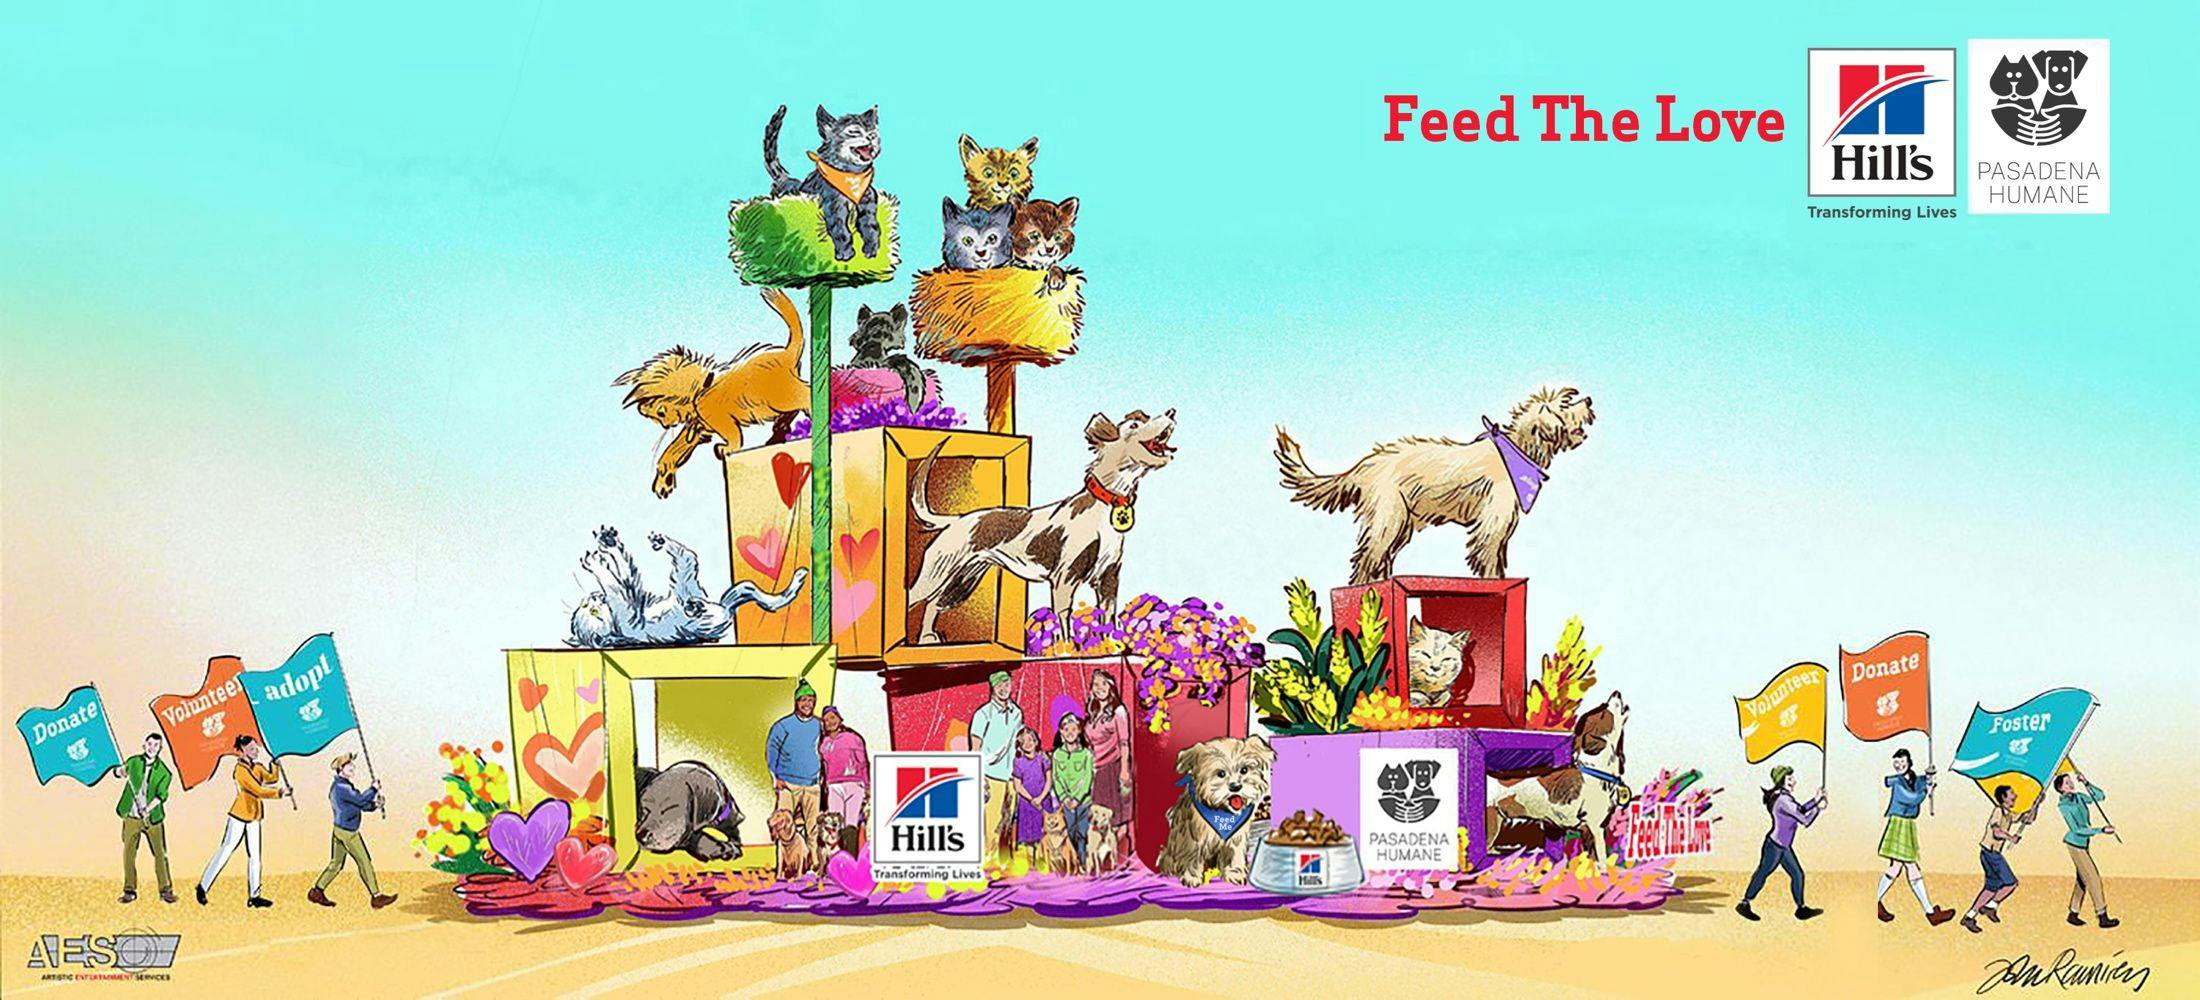 Image courtesy of Hill's Pet Nutrition 